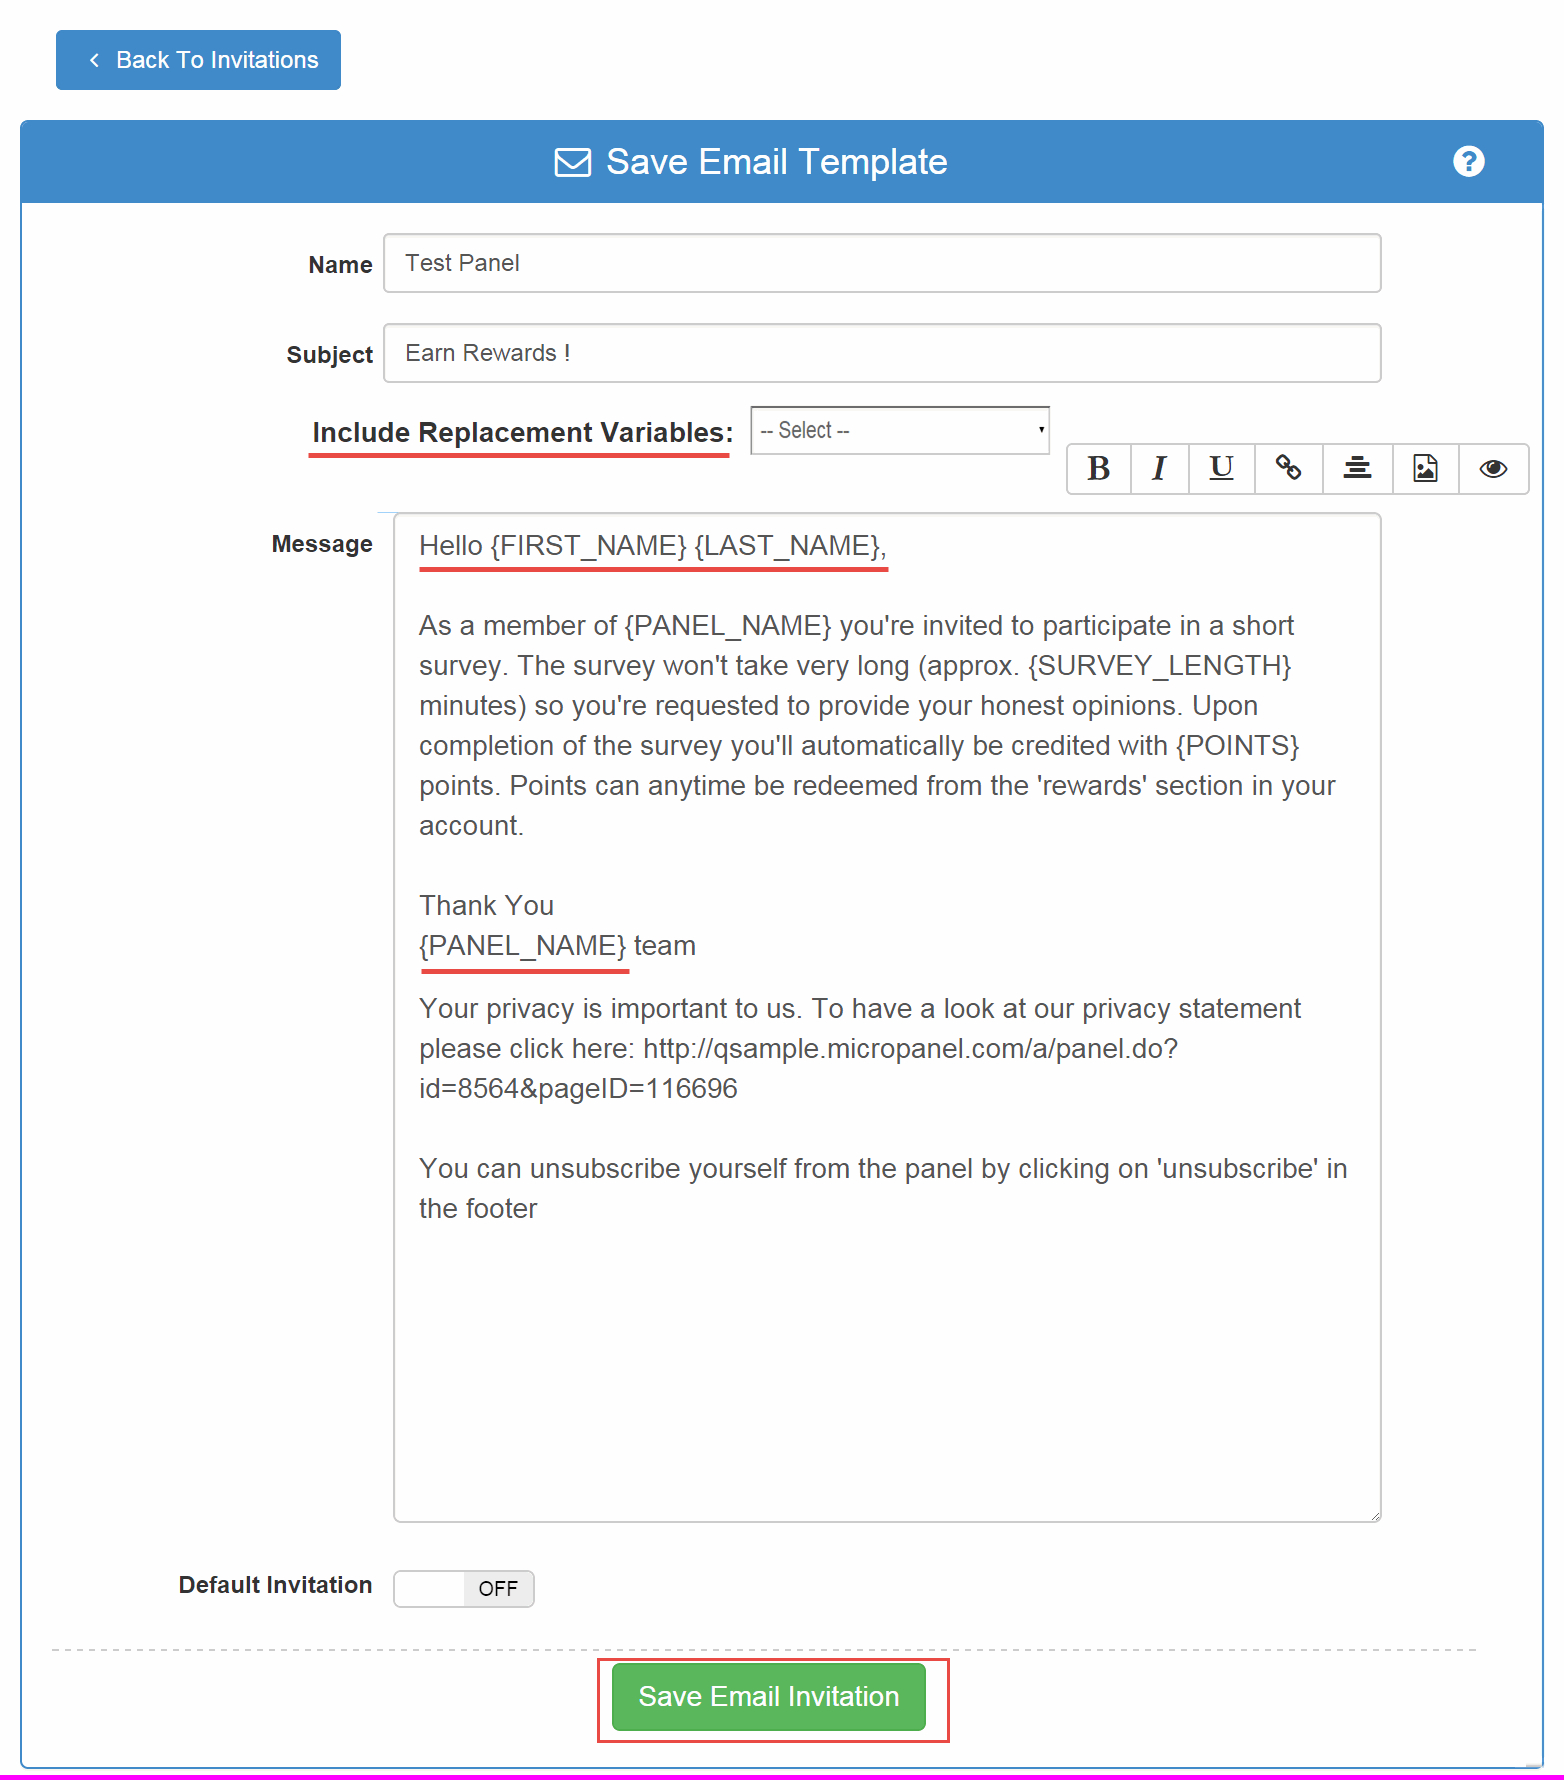 Global Email Invitation Templates For Panels Surveyanalytics Online inside dimensions 1564 X 1780